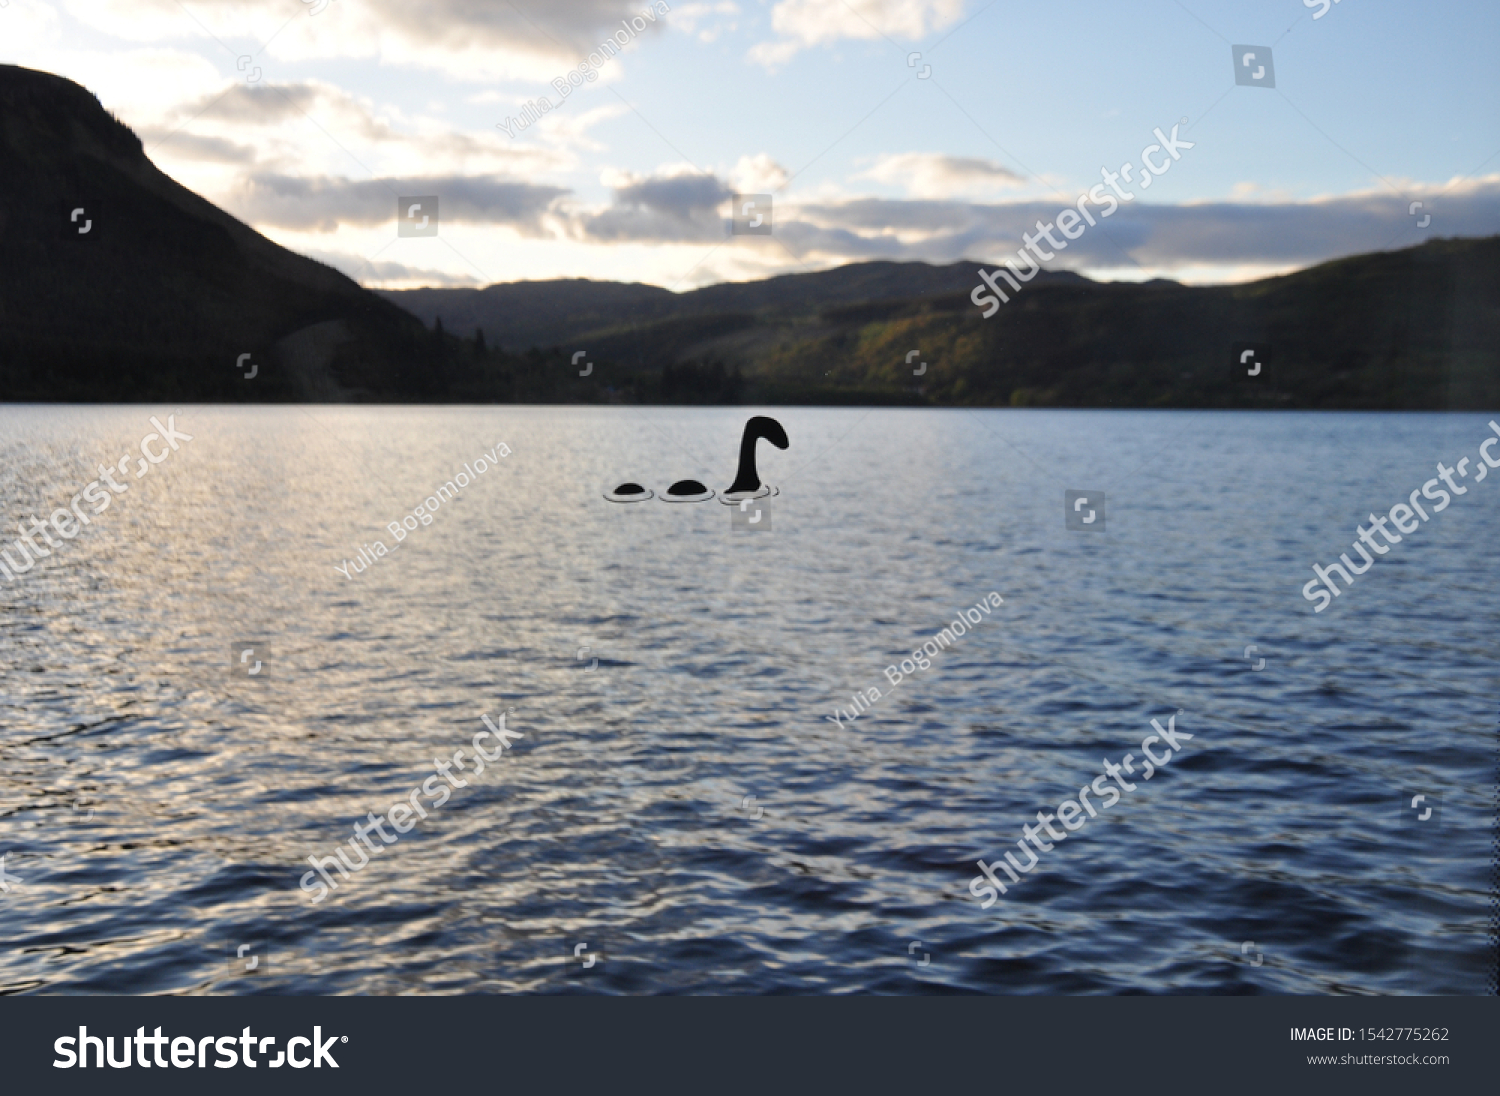 Loch ness monster images stock photos vectors